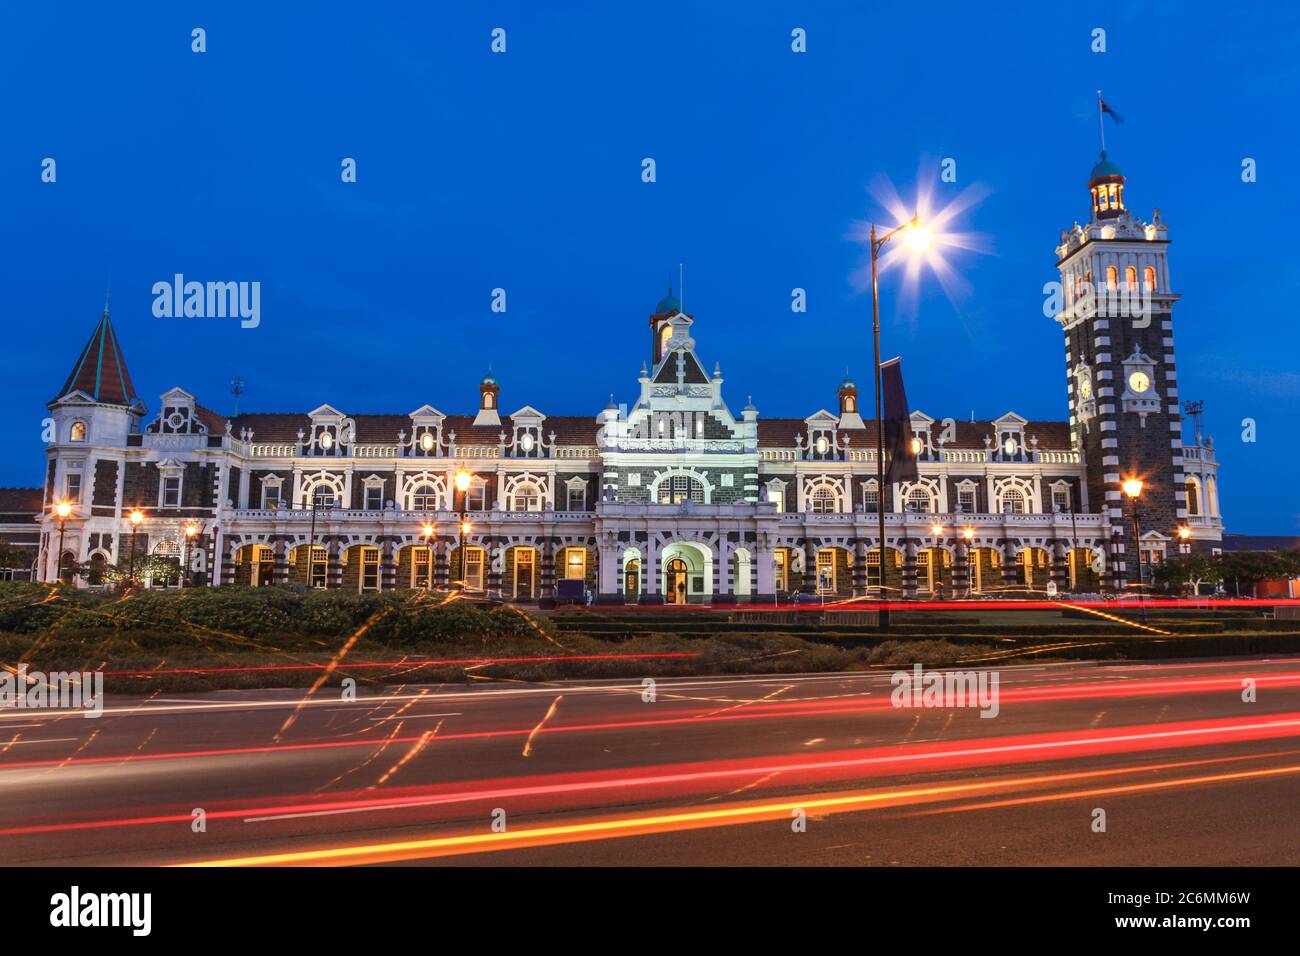 Dunedin Train station is a beautiful example of early 20th century architecture an is one of the most famous landmarks in Dunedin located on the South Stock Photo